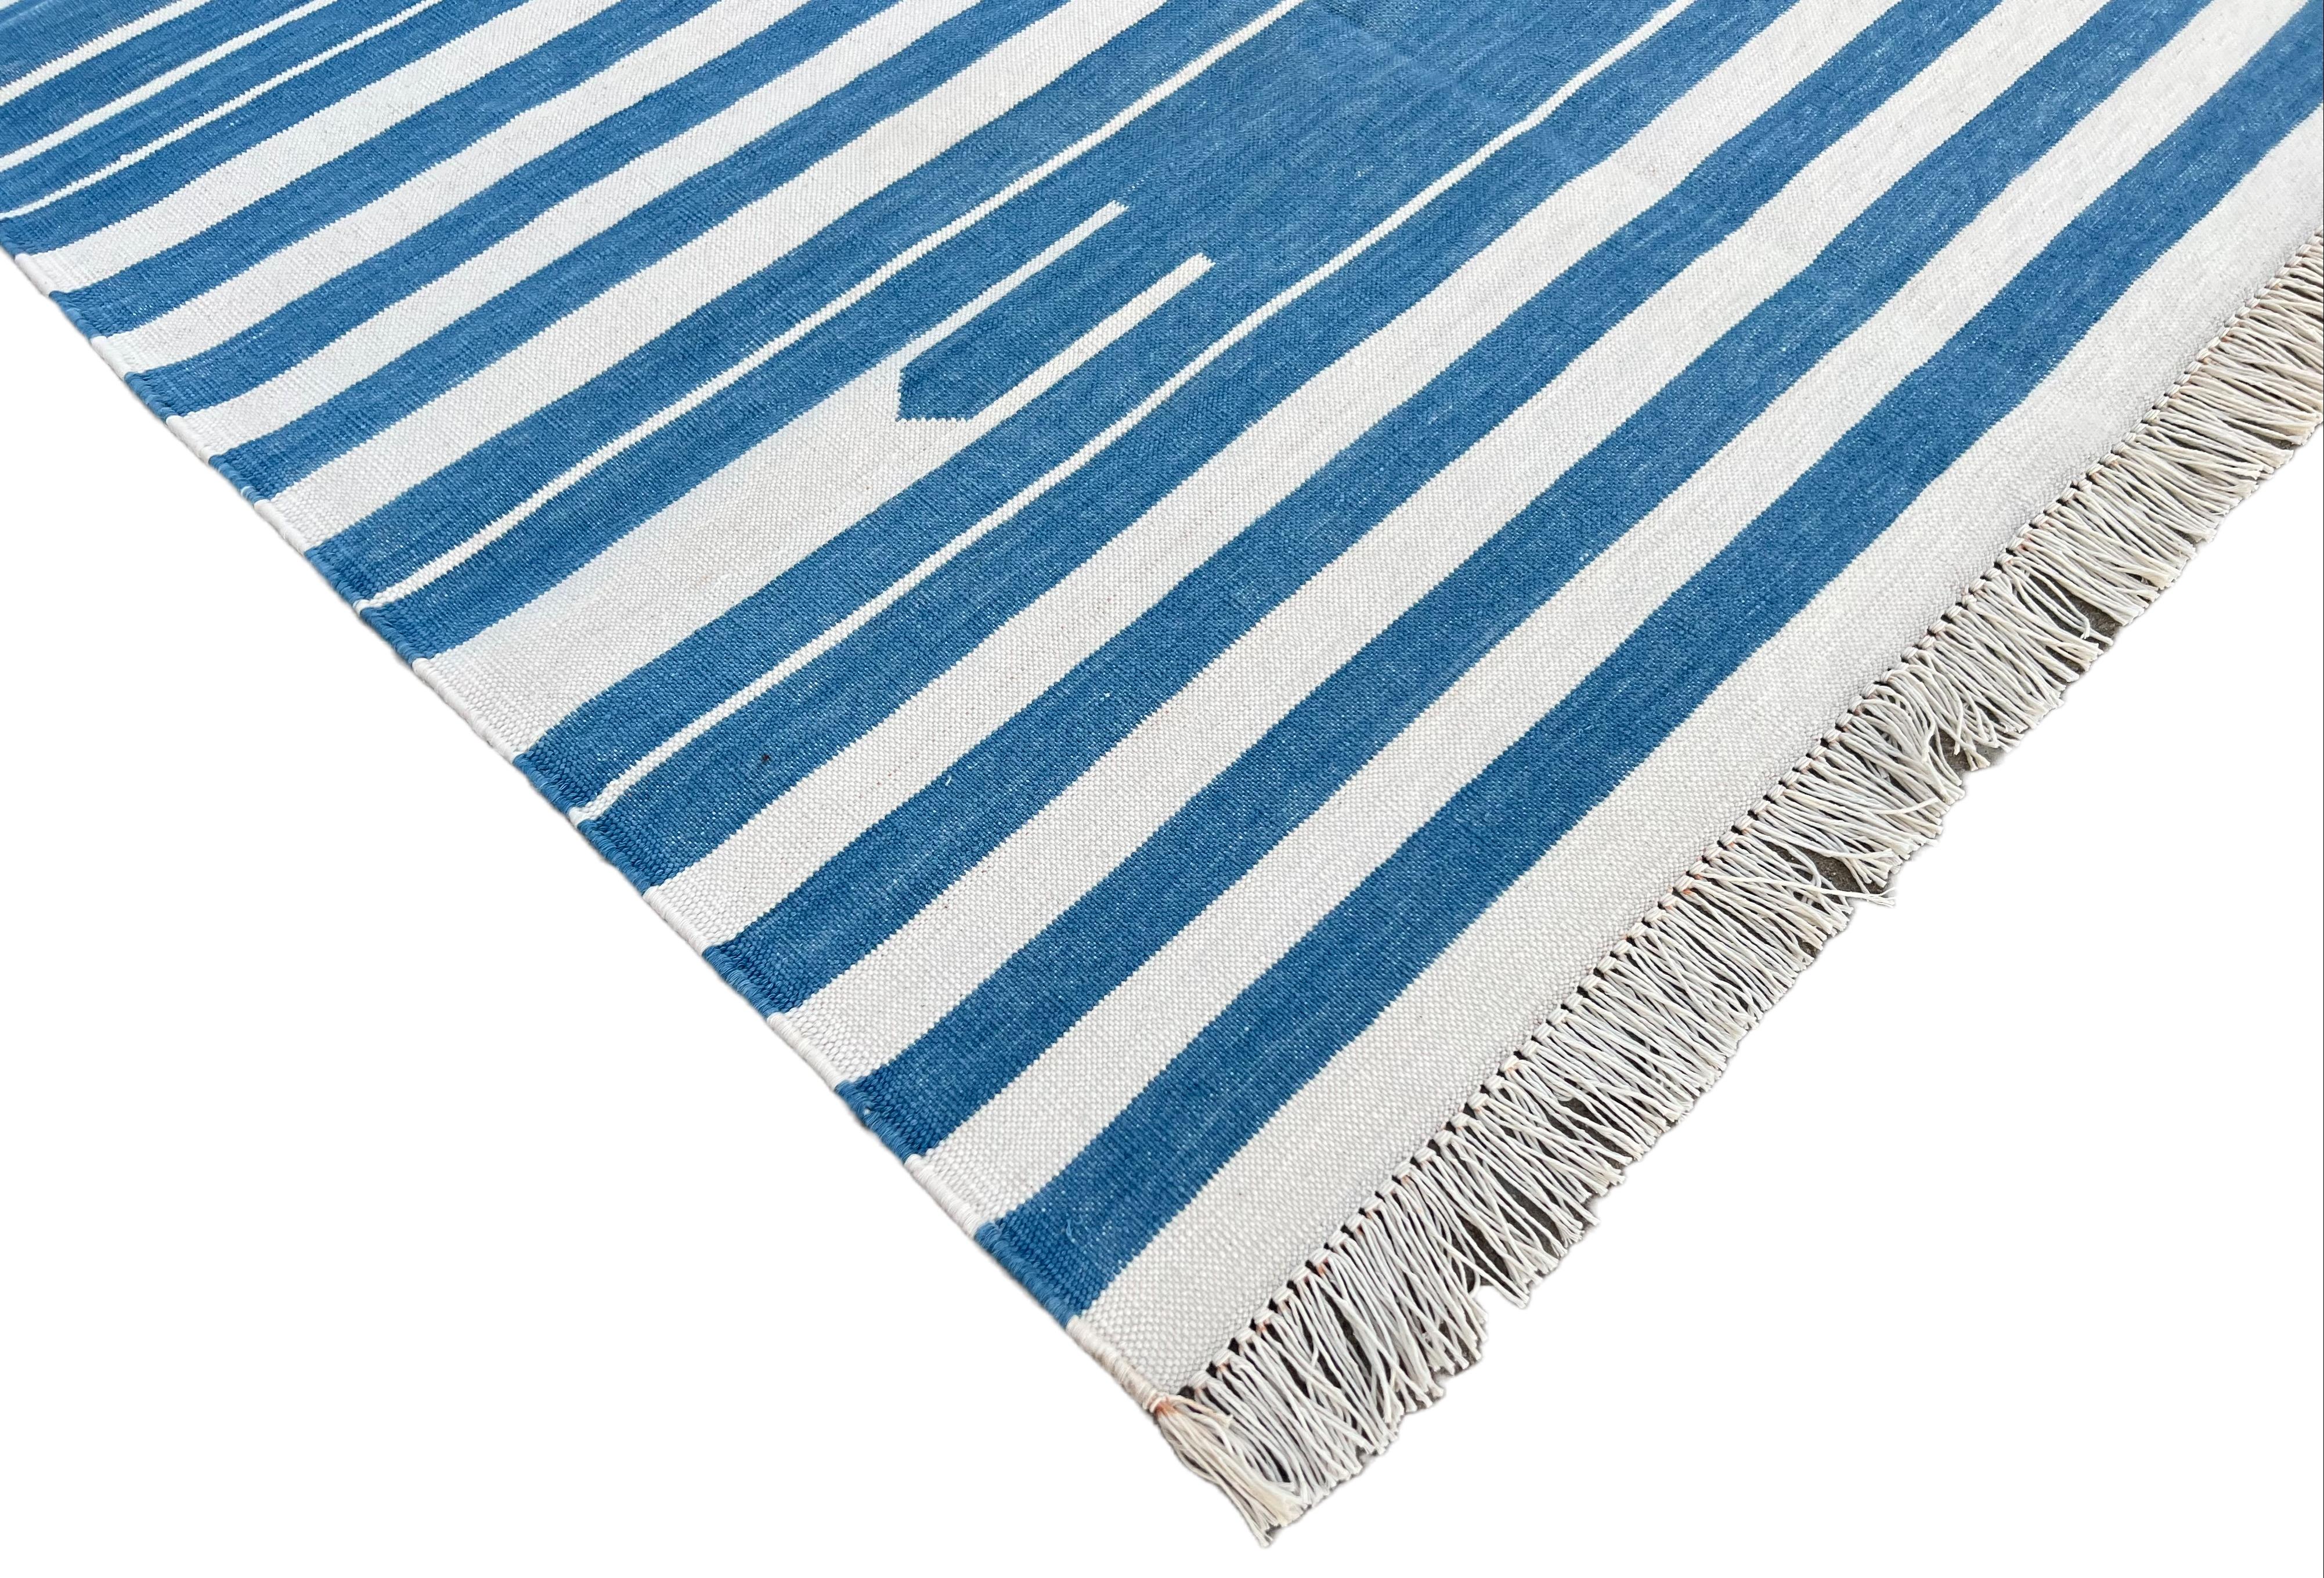 Cotton Vegetable Dyed Sky Blue And White Striped Indian Dhurrie Rug-3'x5'

These special flat-weave dhurries are hand-woven with 15 ply 100% cotton yarn. Due to the special manufacturing techniques used to create our rugs, the size and color of each